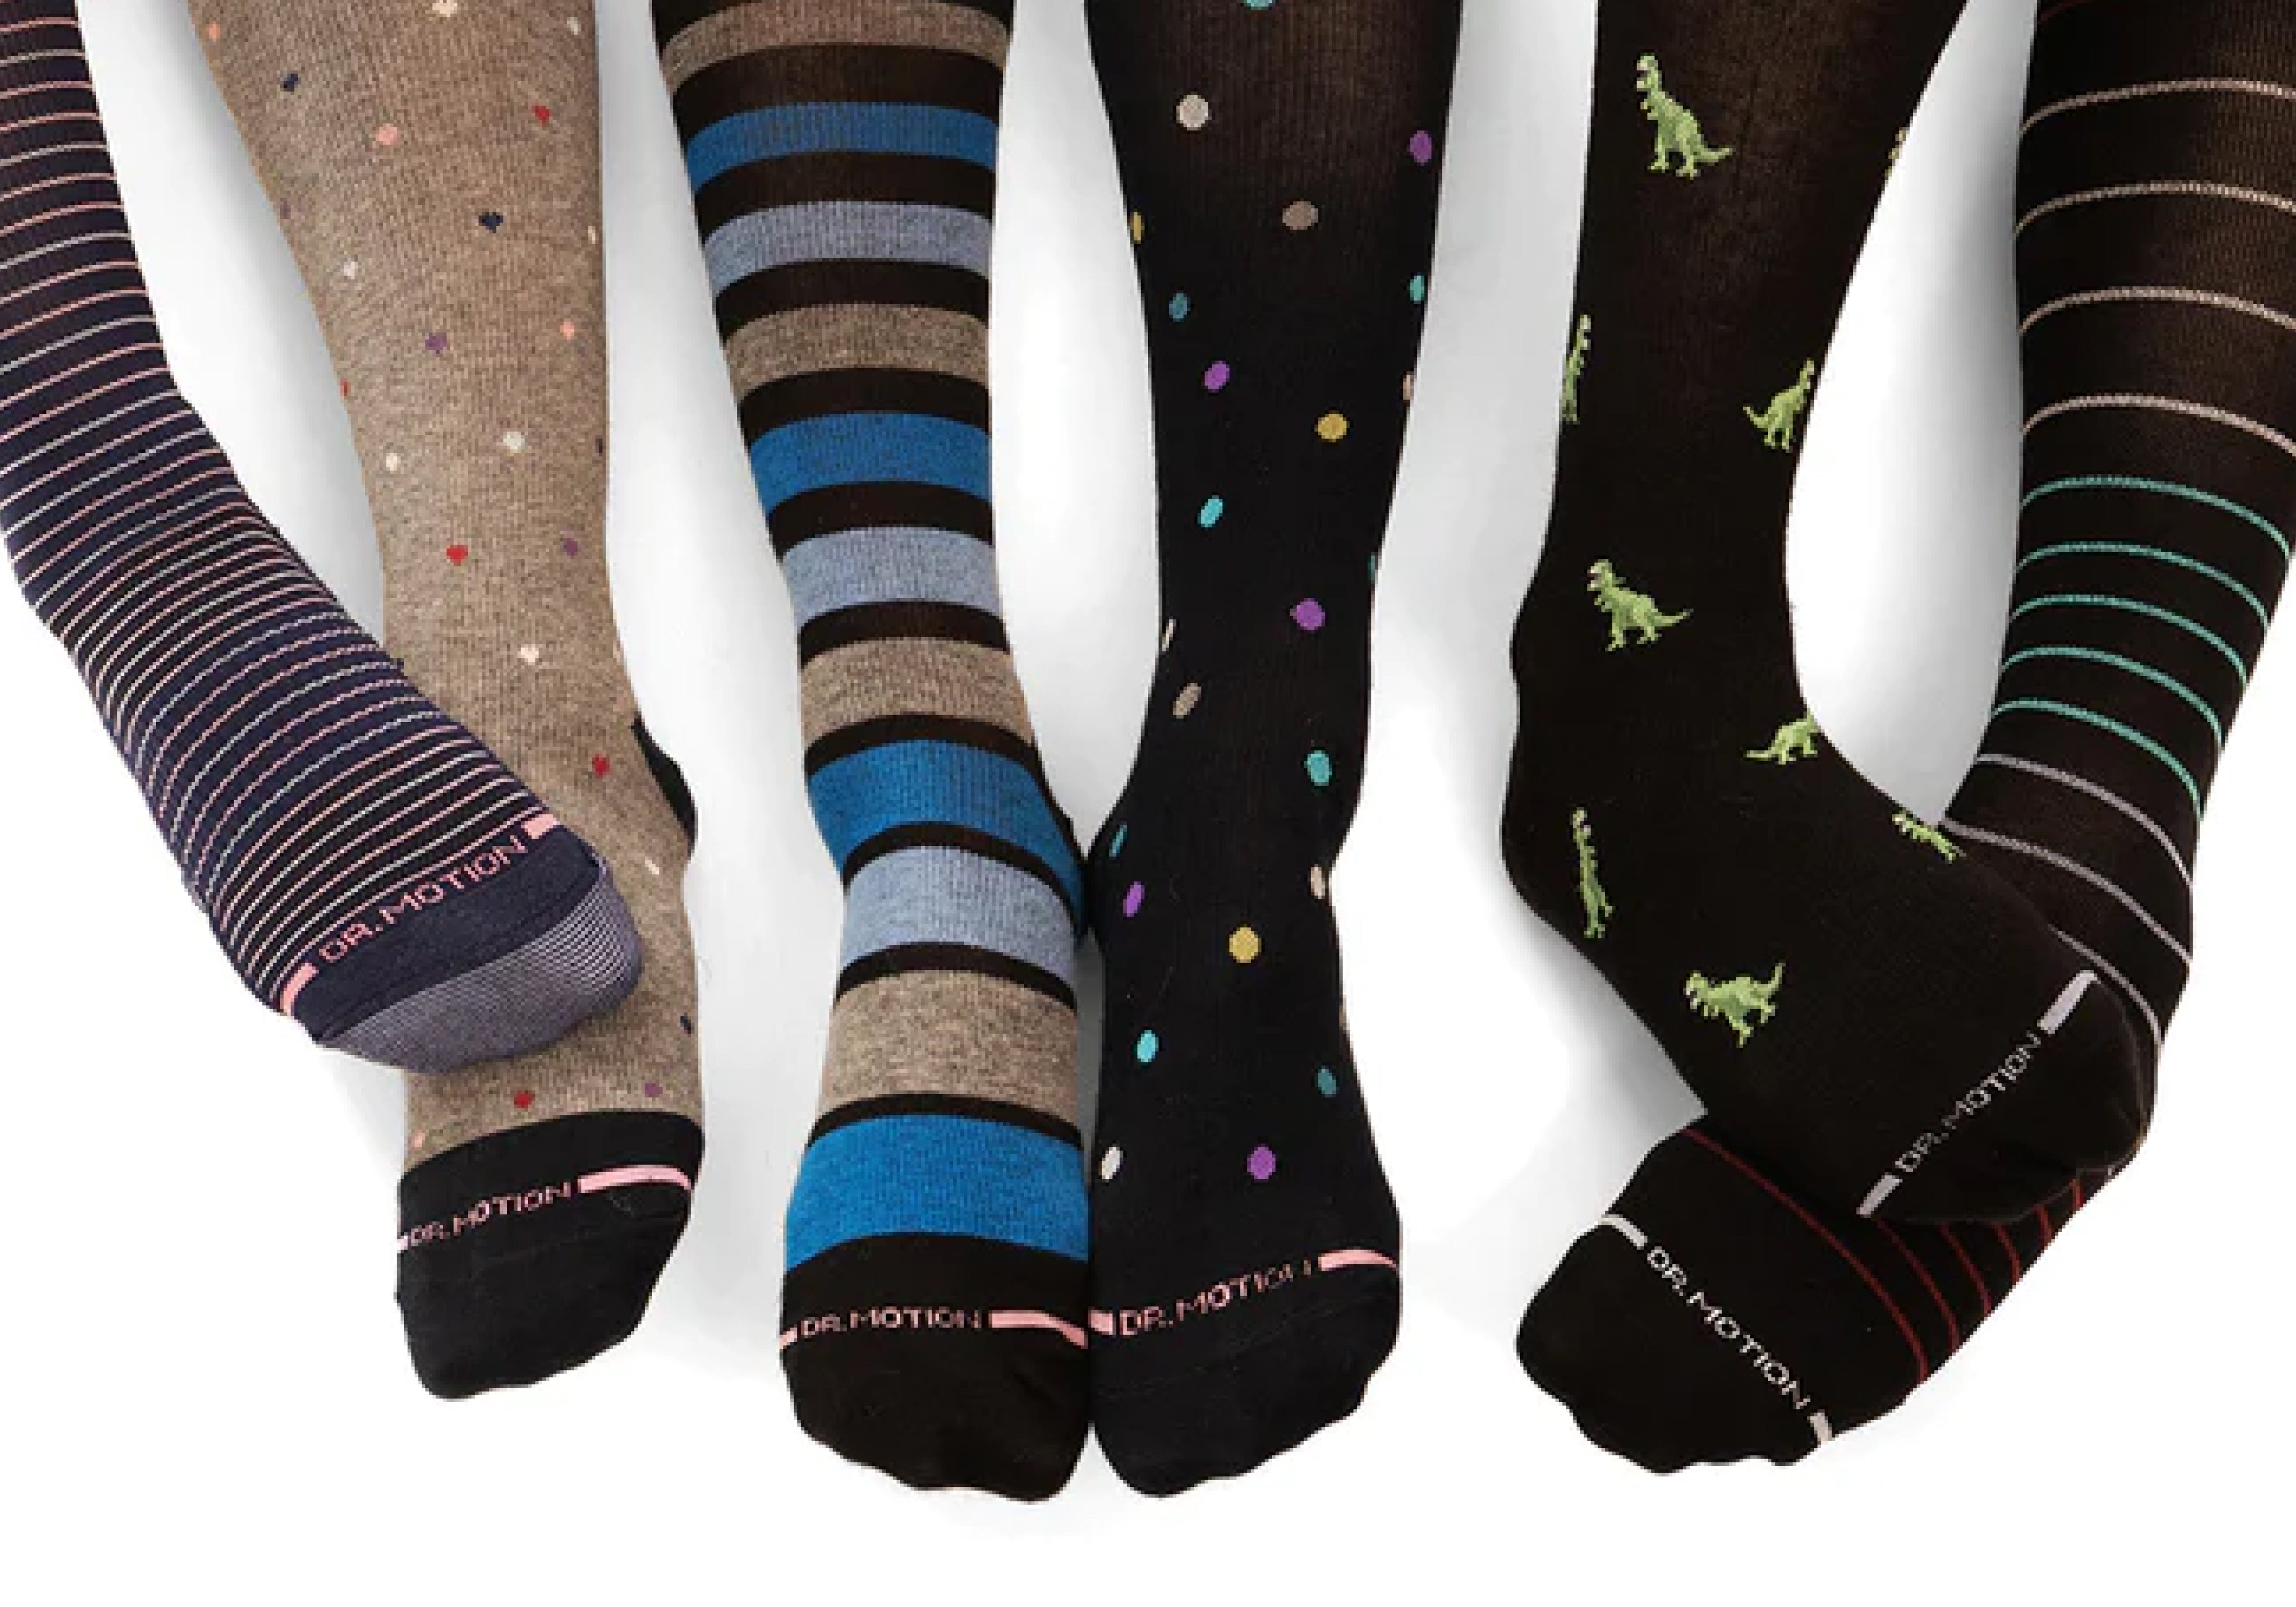 5 New Compression Sock Designs You’re Going To Love!